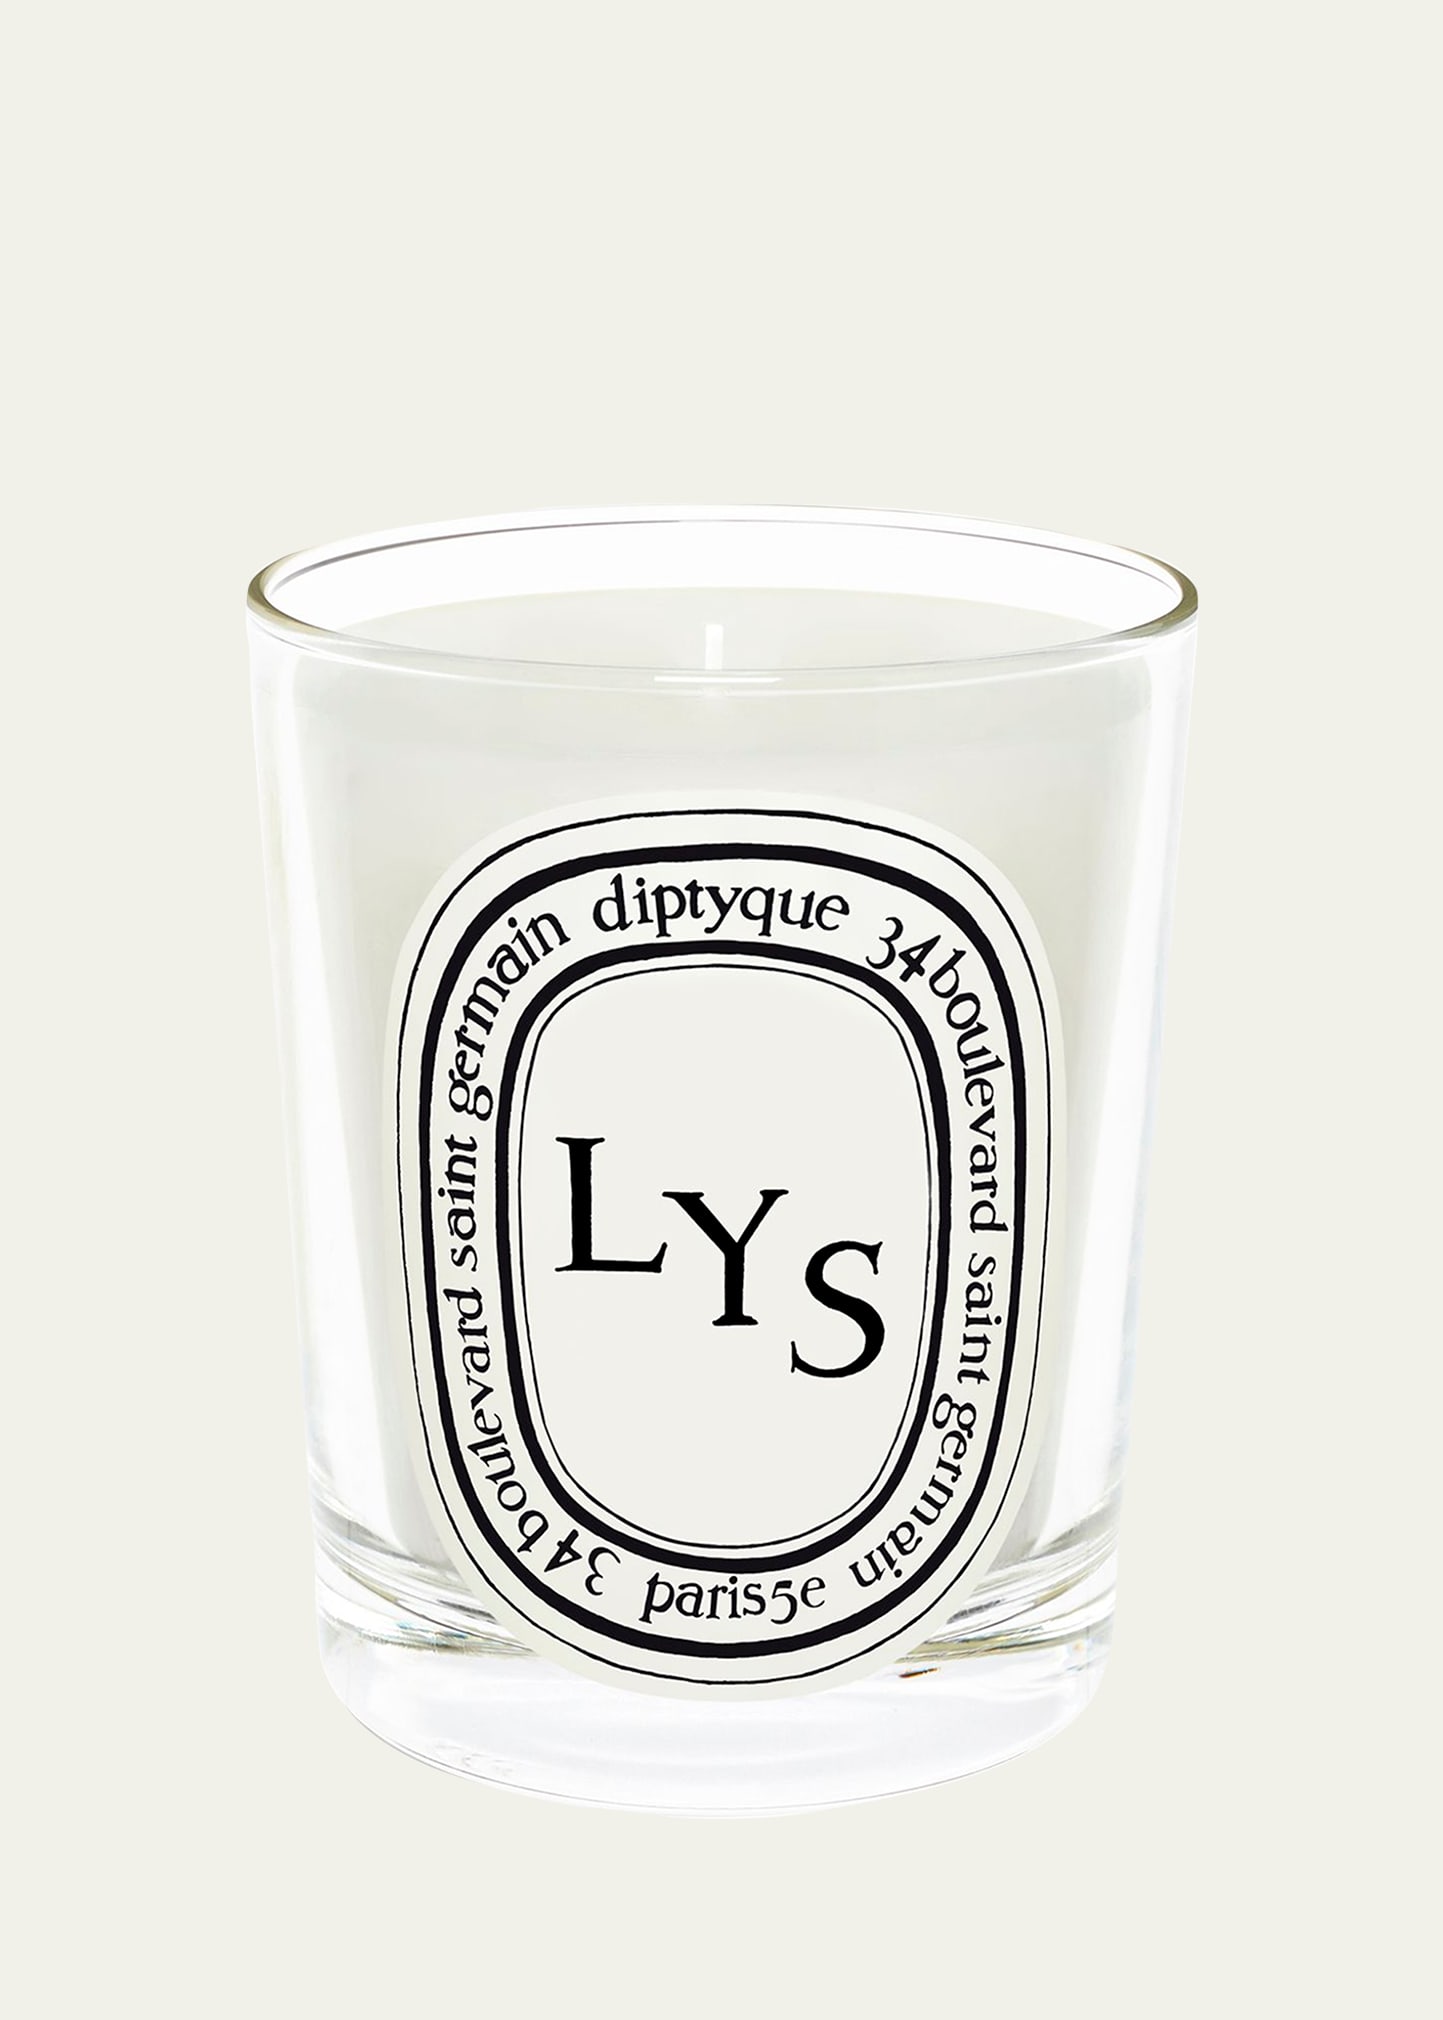 DIPTYQUE Lys (Lily) Scented Candle, 6.5 oz.